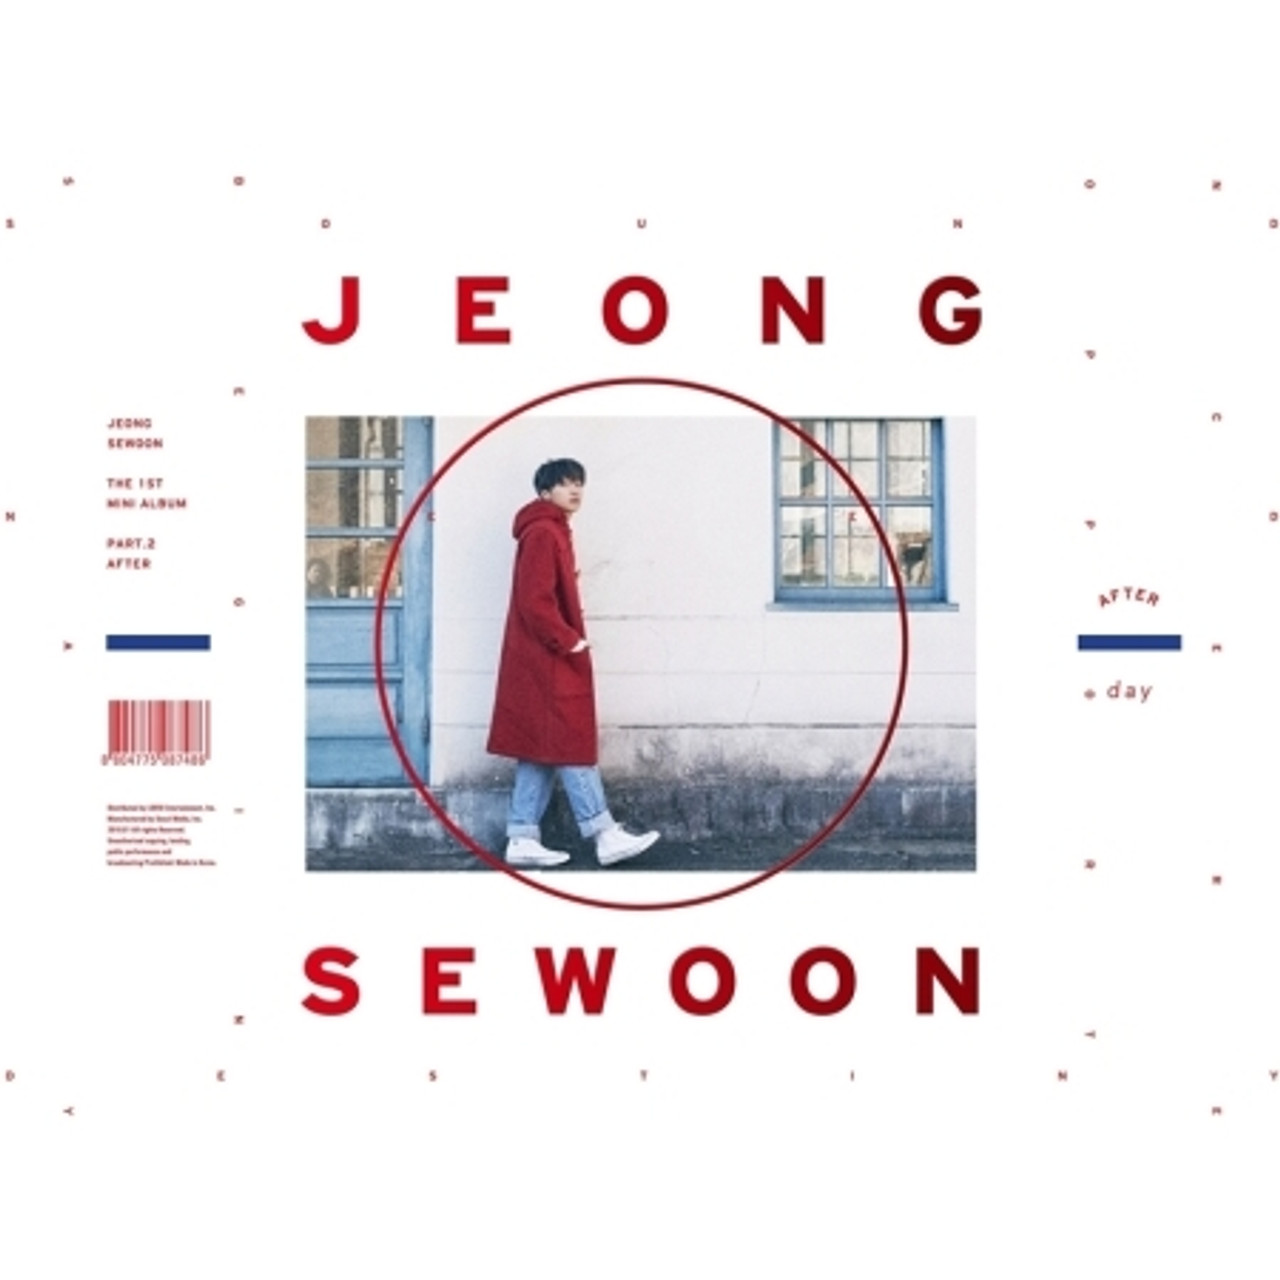 JEONG SEWOON  1st Mini PART2 AFTER Day ver  and  Poster